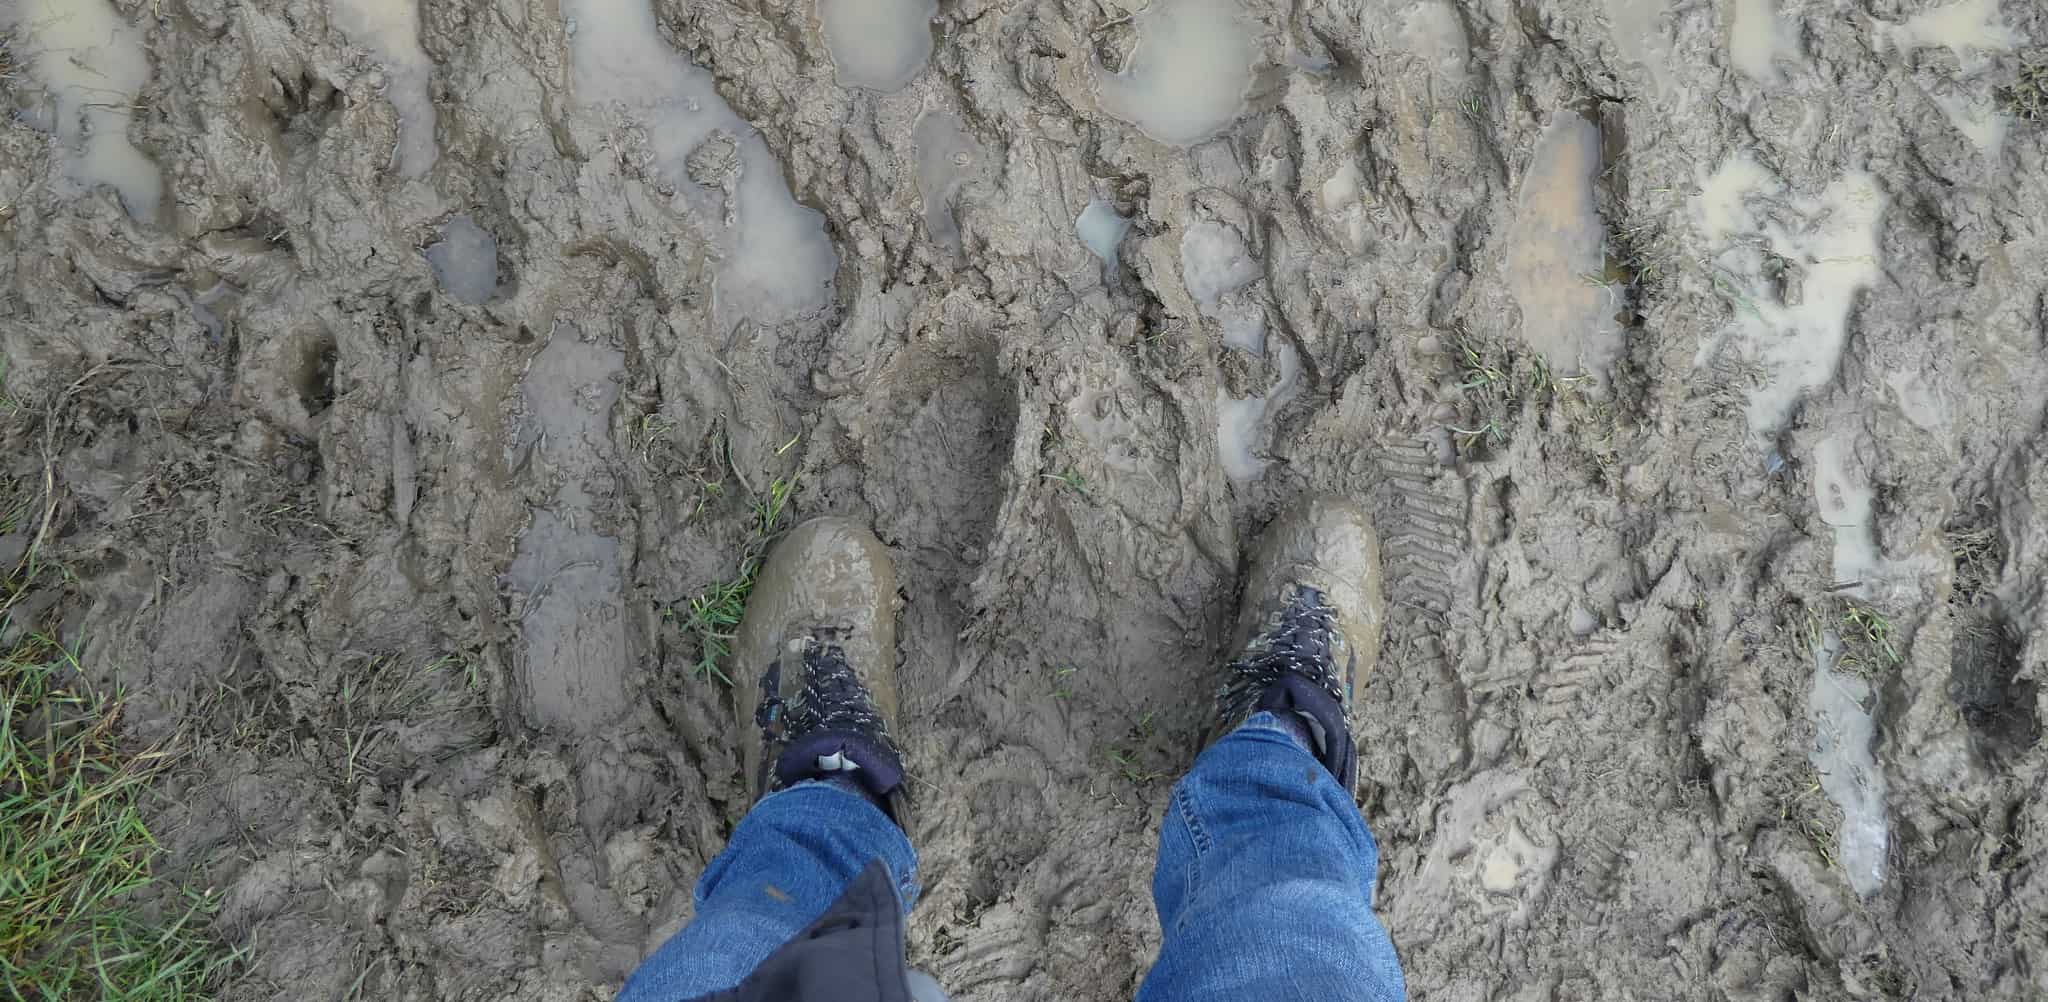 Tips For Hiking Through Mud